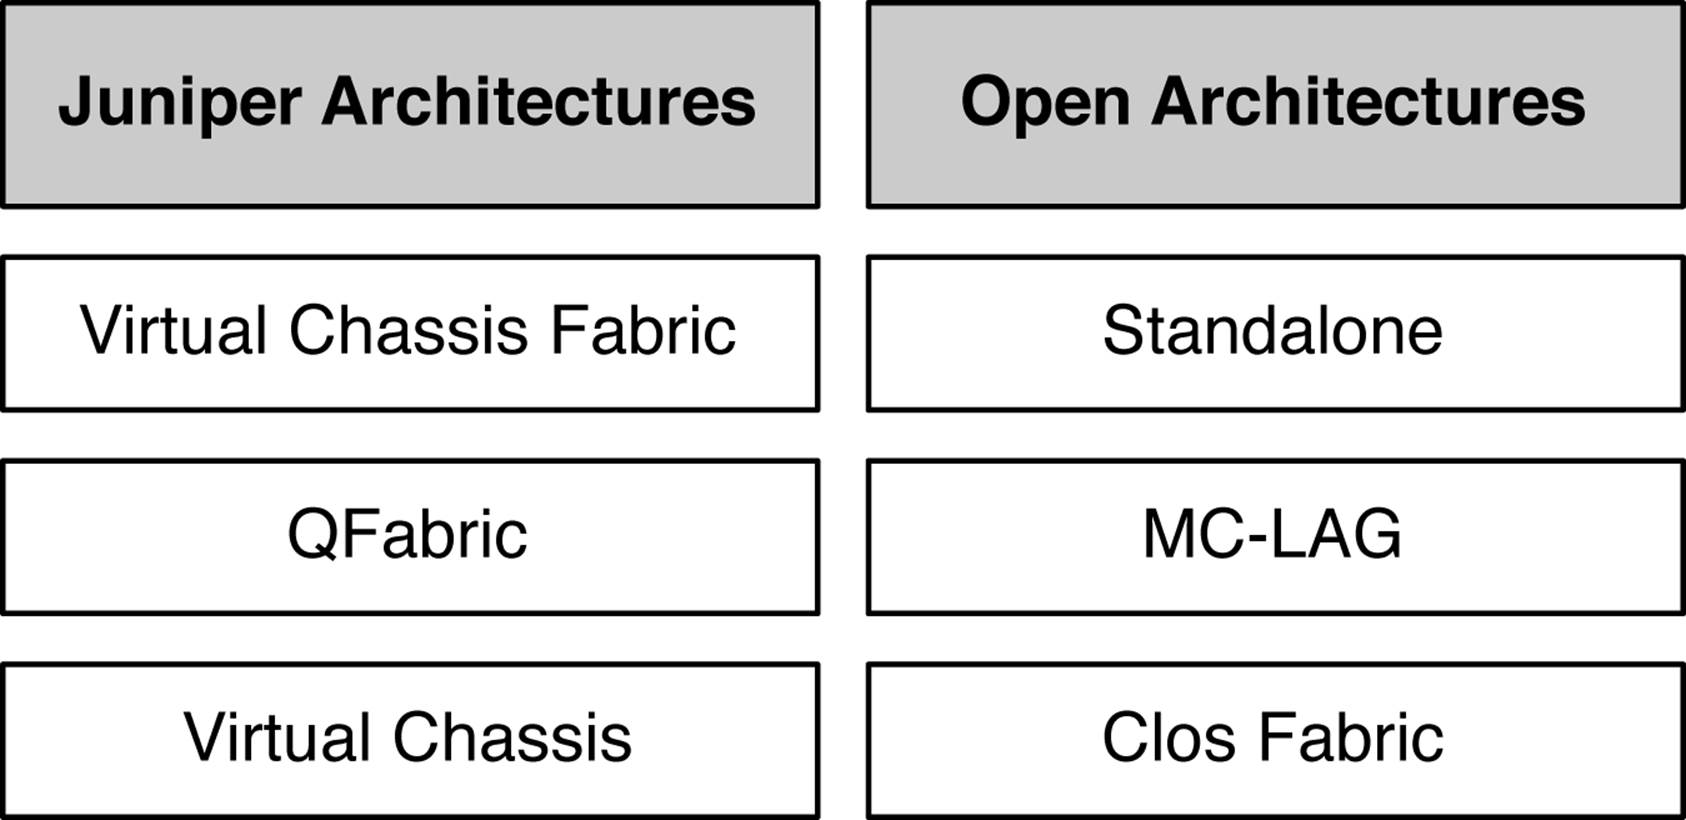 Juniper architectures and open architectures options